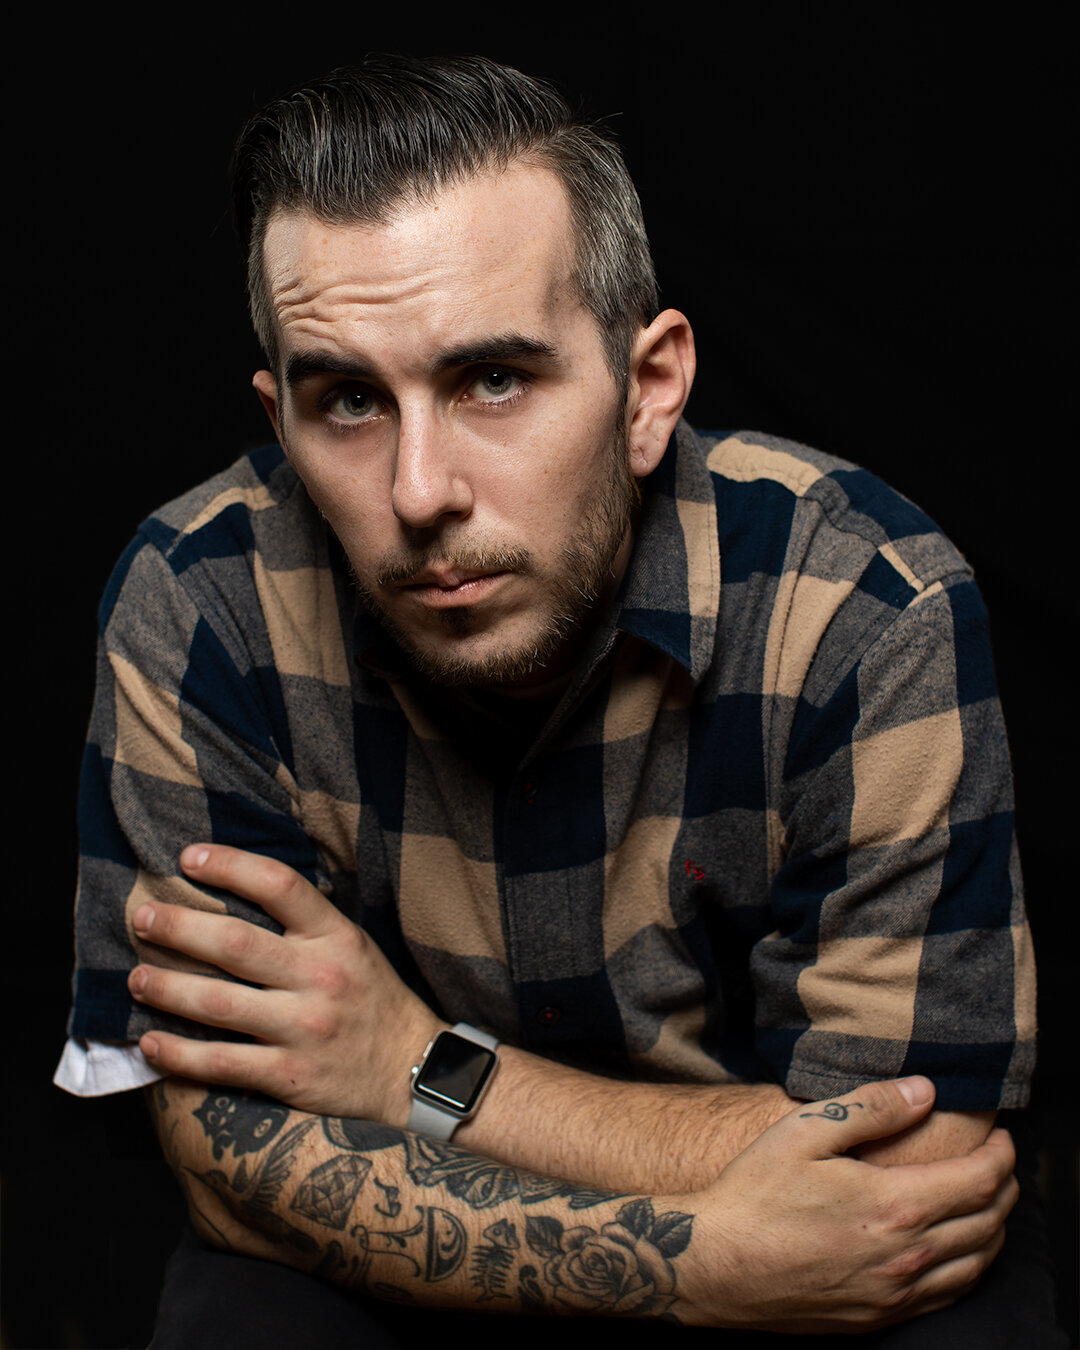 Professional headshot of young, tattooed actor in San Francisco | Brian Klemm (Copy) (Copy)